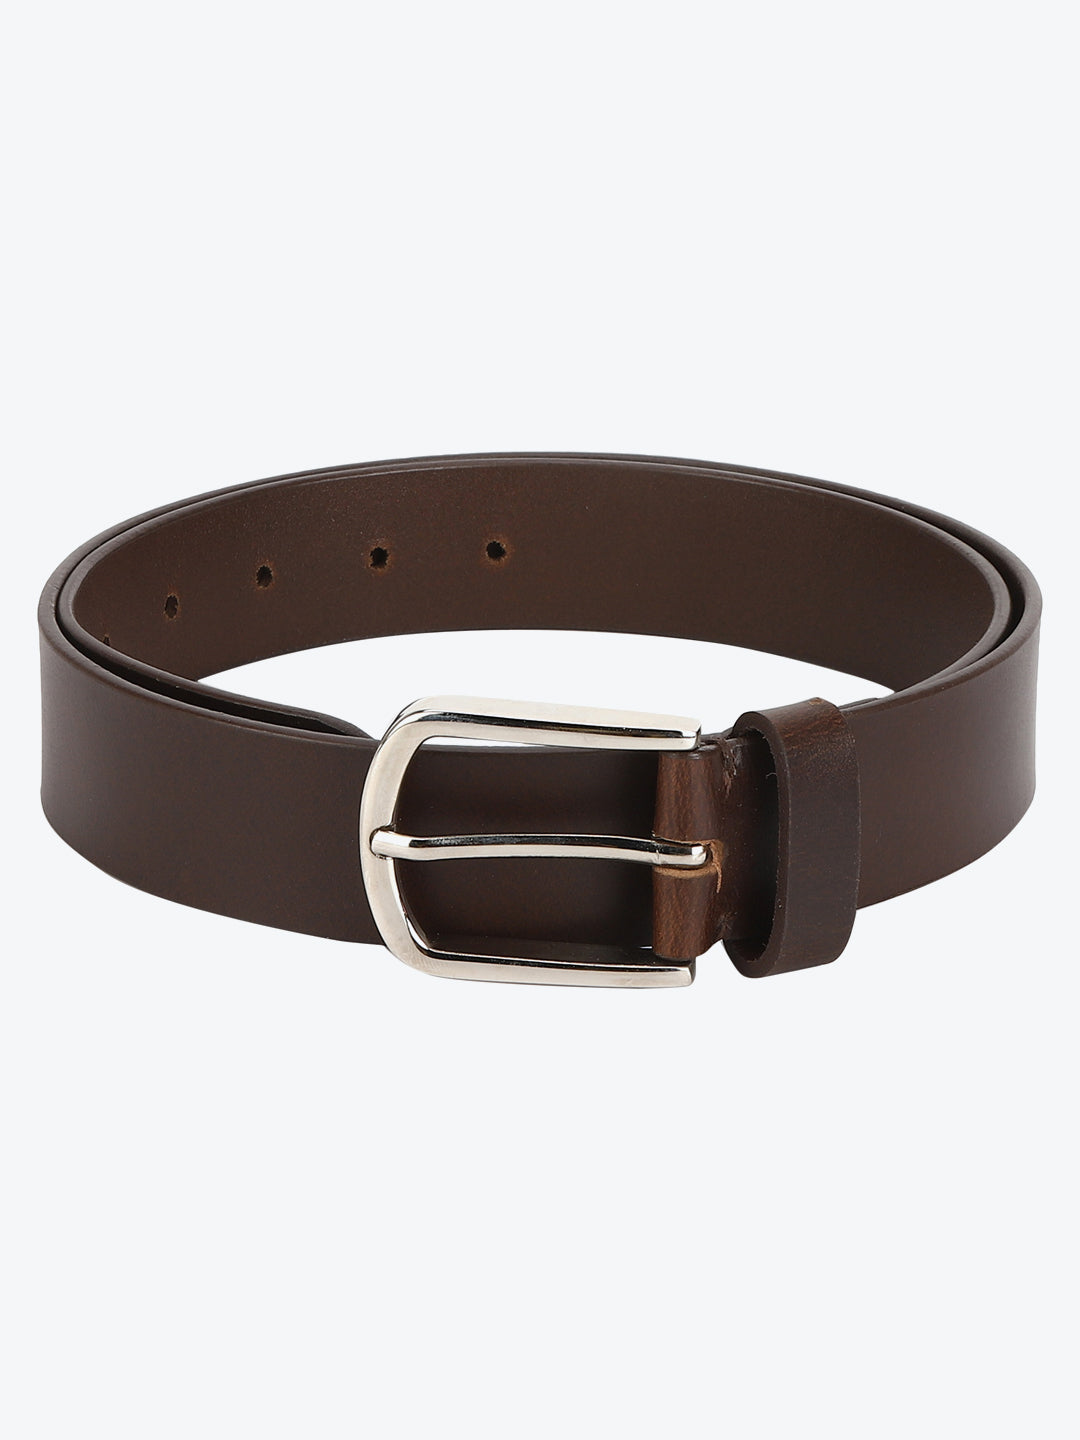 Two-tone brown belt